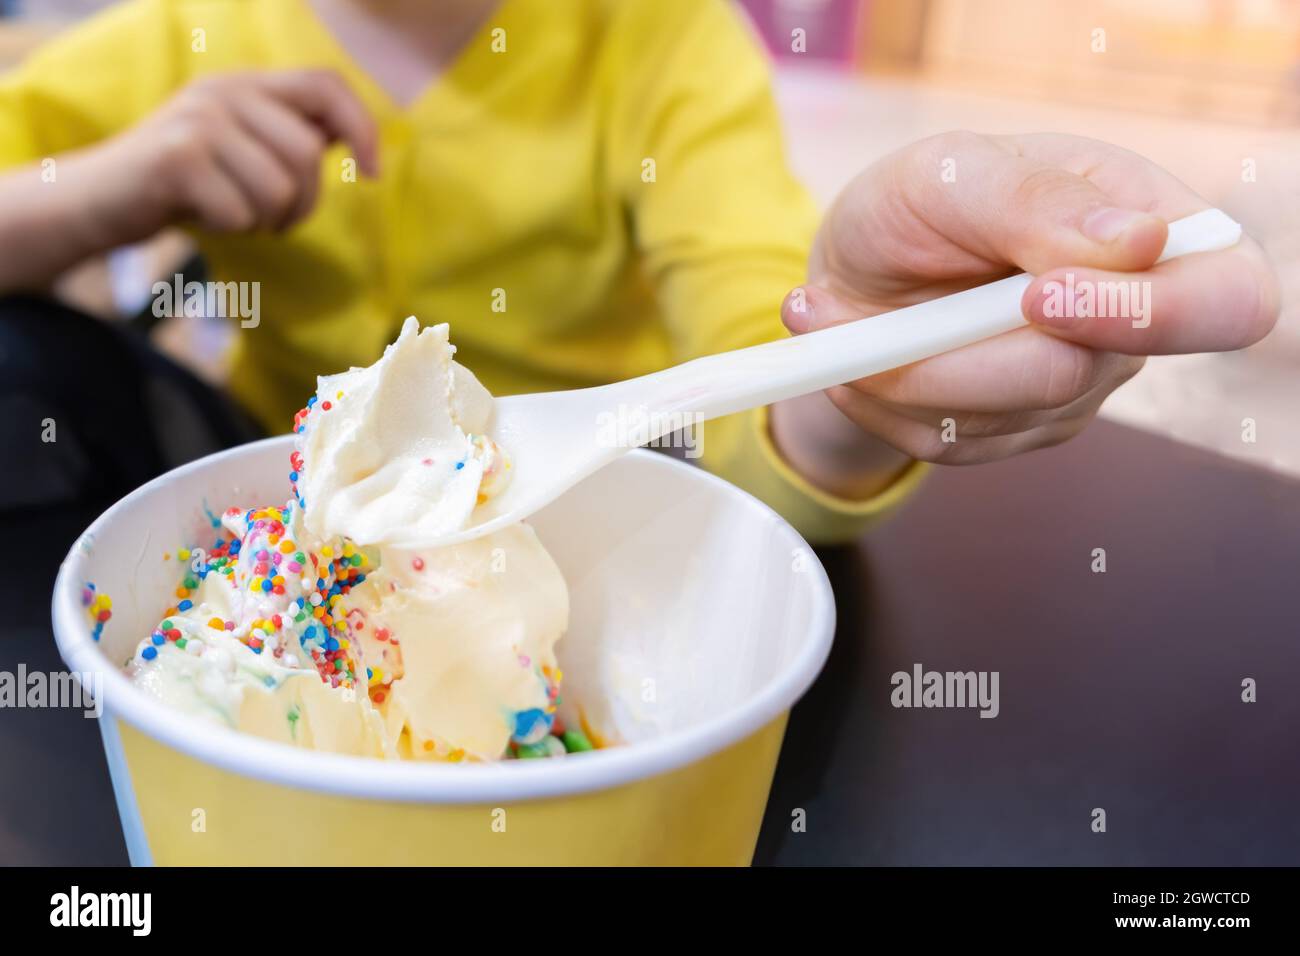 Girl Hand Holding White Plastic Spoon With Sweet Yogurt And Sprinkles - Shallow Focus Stock Photo